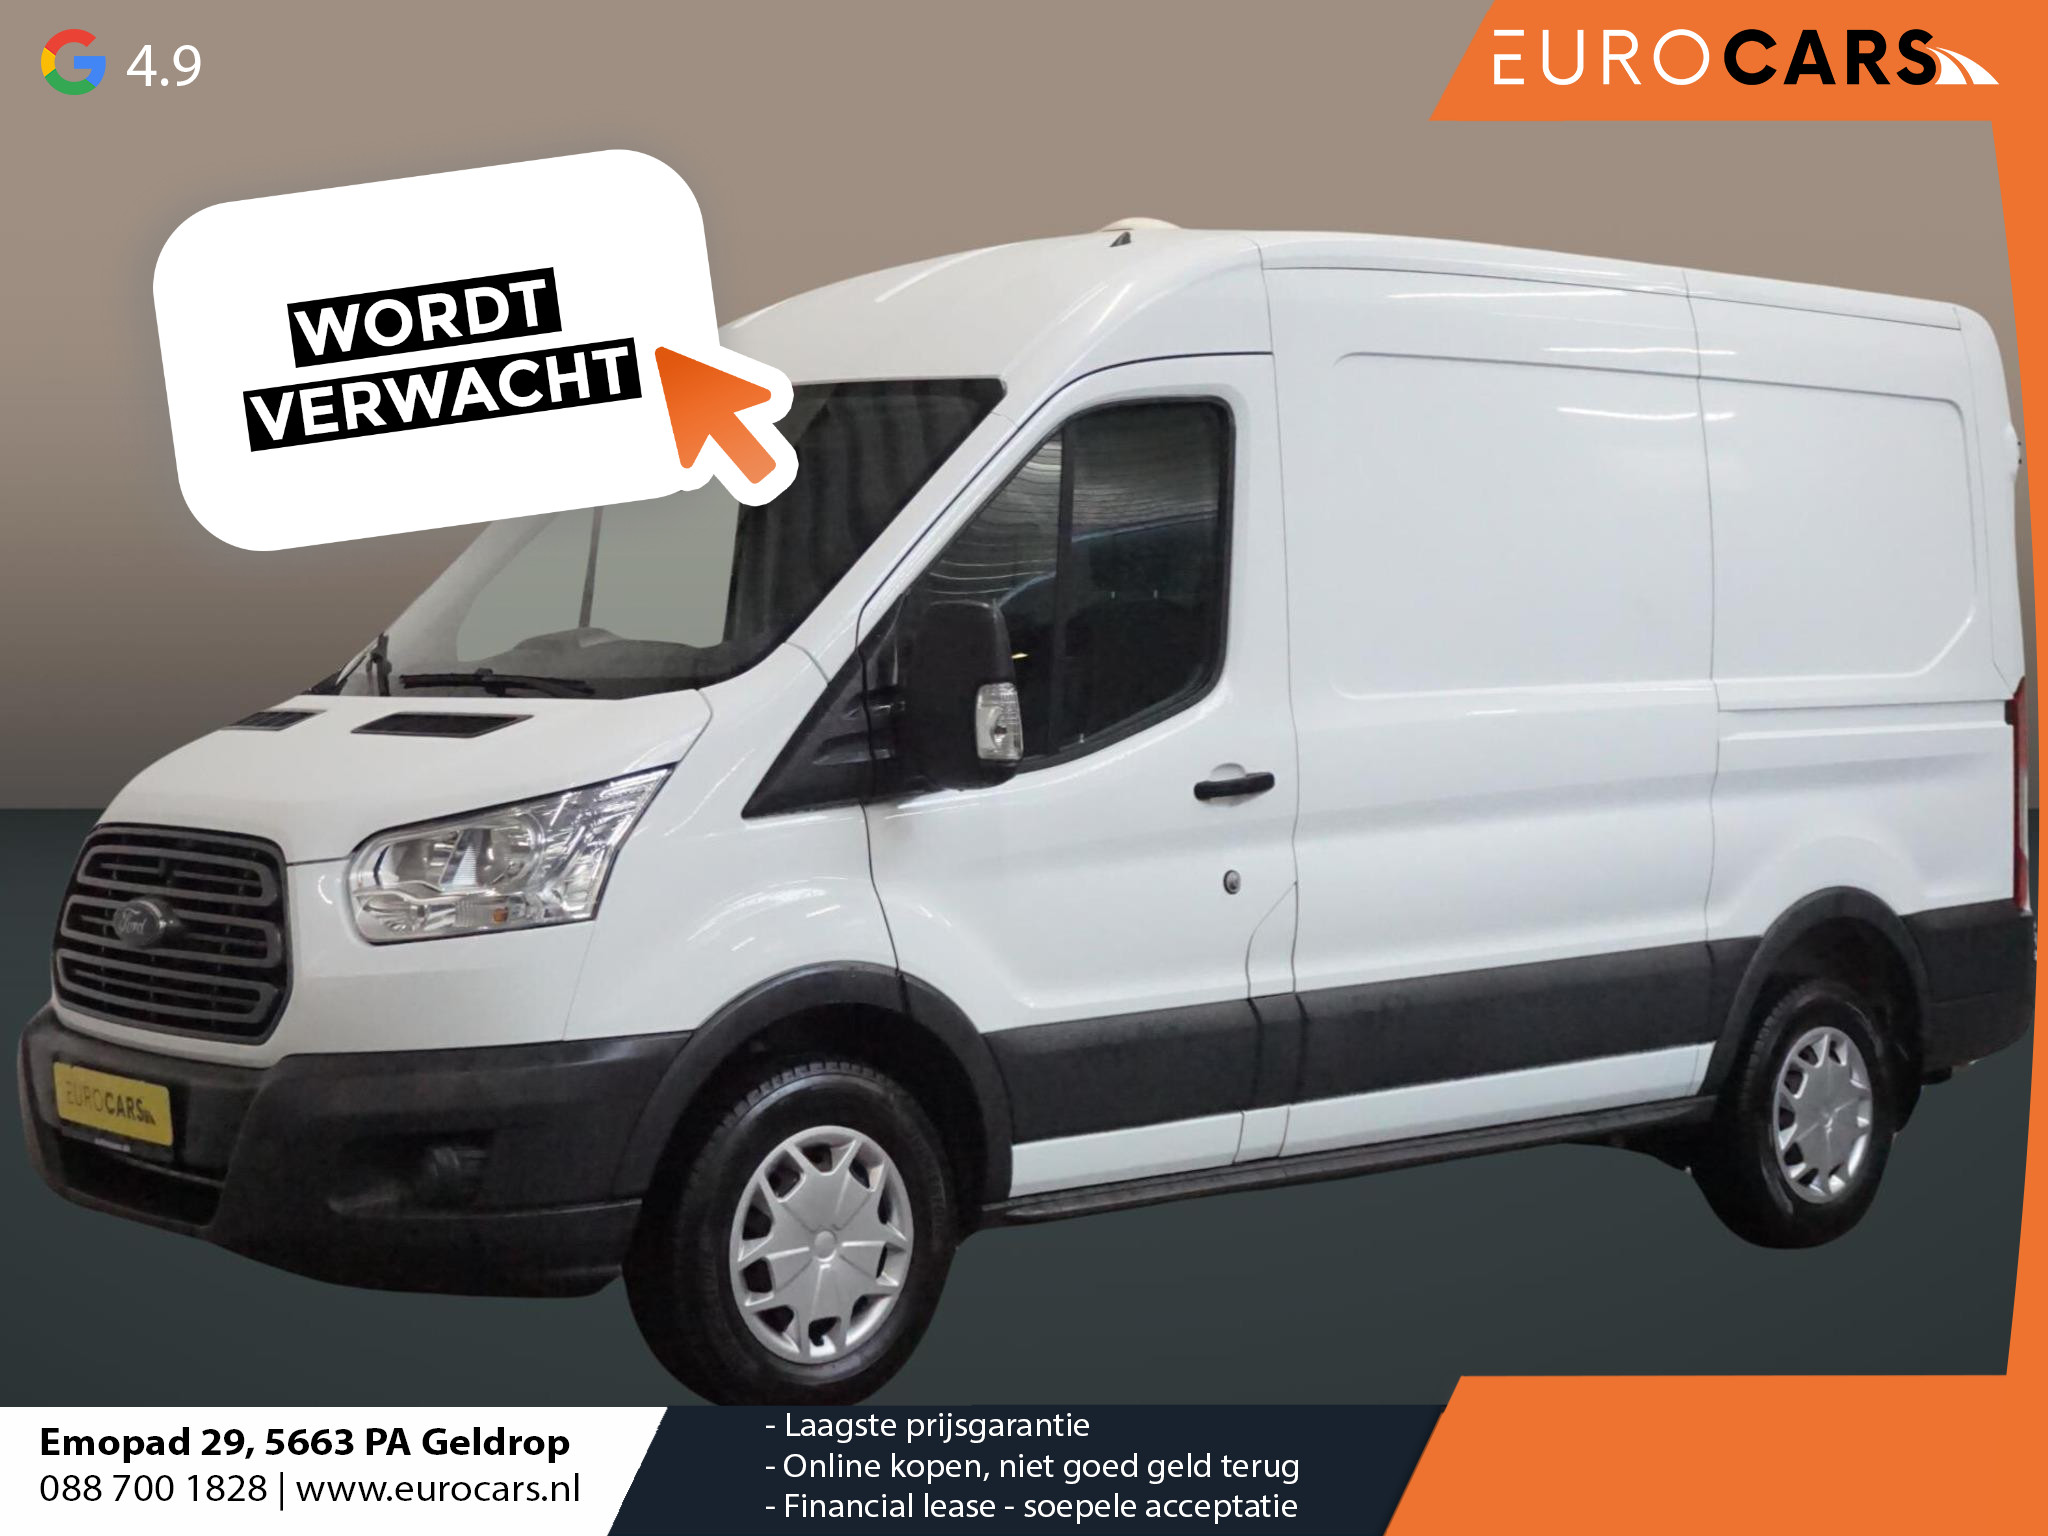 Ford Transit 310 2.0 TDCI L2H2 Trend Airco Cruise Control Trekhaak